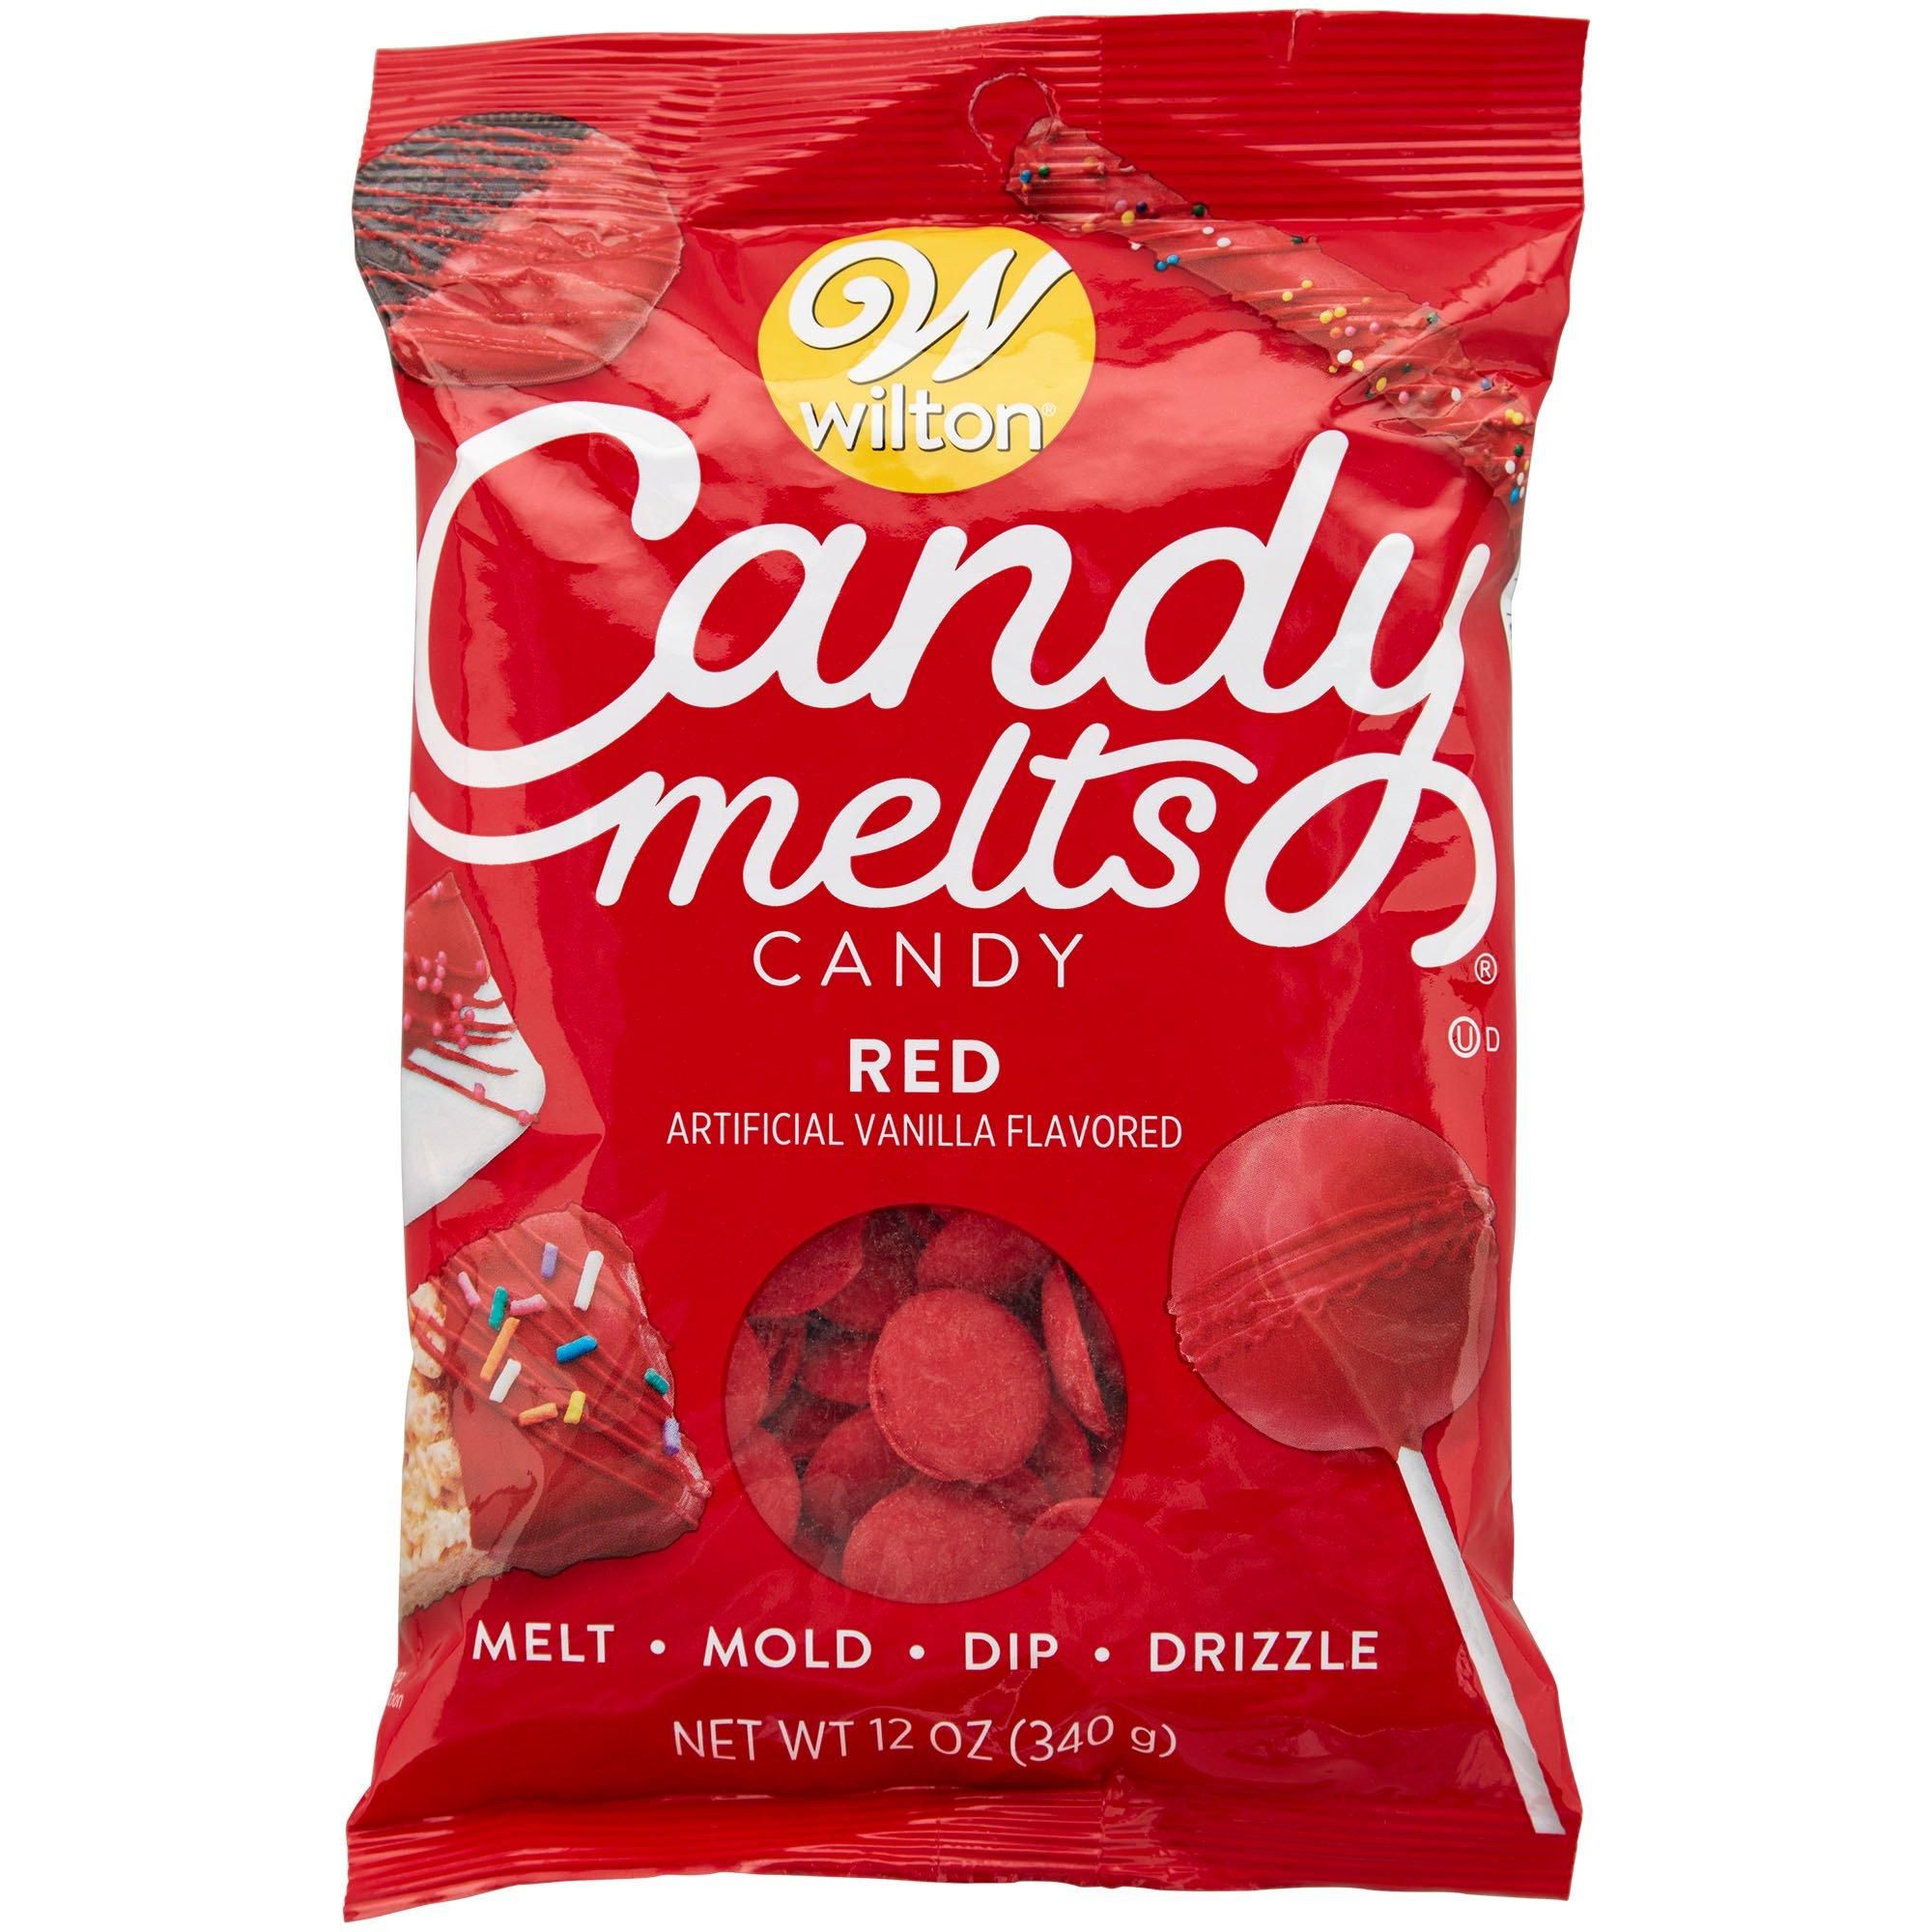 Save on Wilton Candy Melts Bright White Order Online Delivery